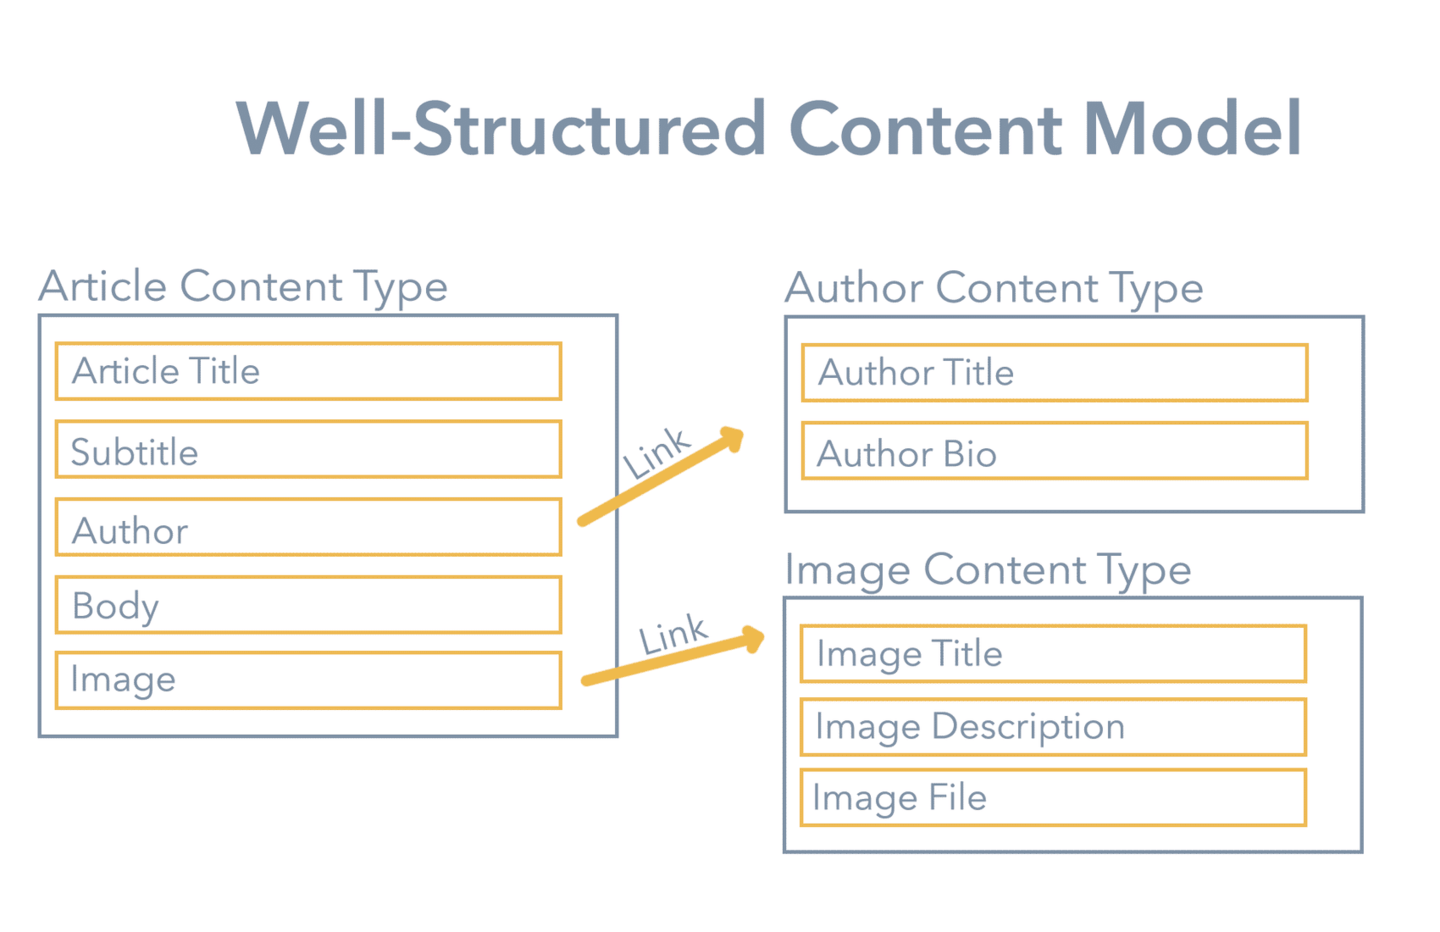 An example of a well-structured content model